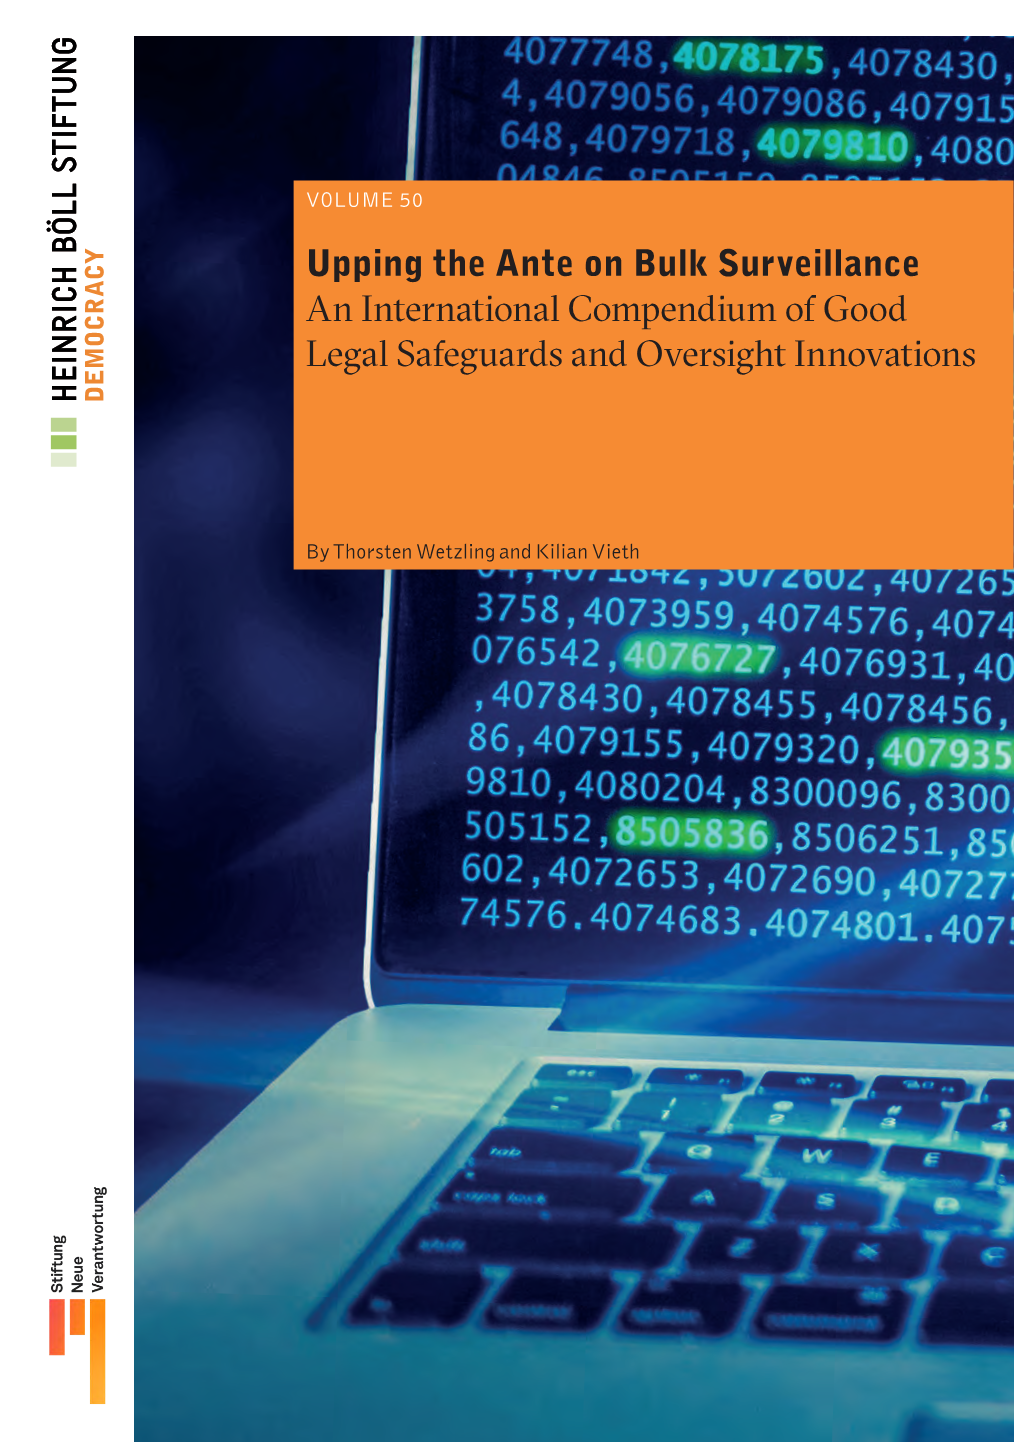 Upping the Ante on Bulk Surveillance an International Compendium of Good Legal Safeguards and Oversight Innovations